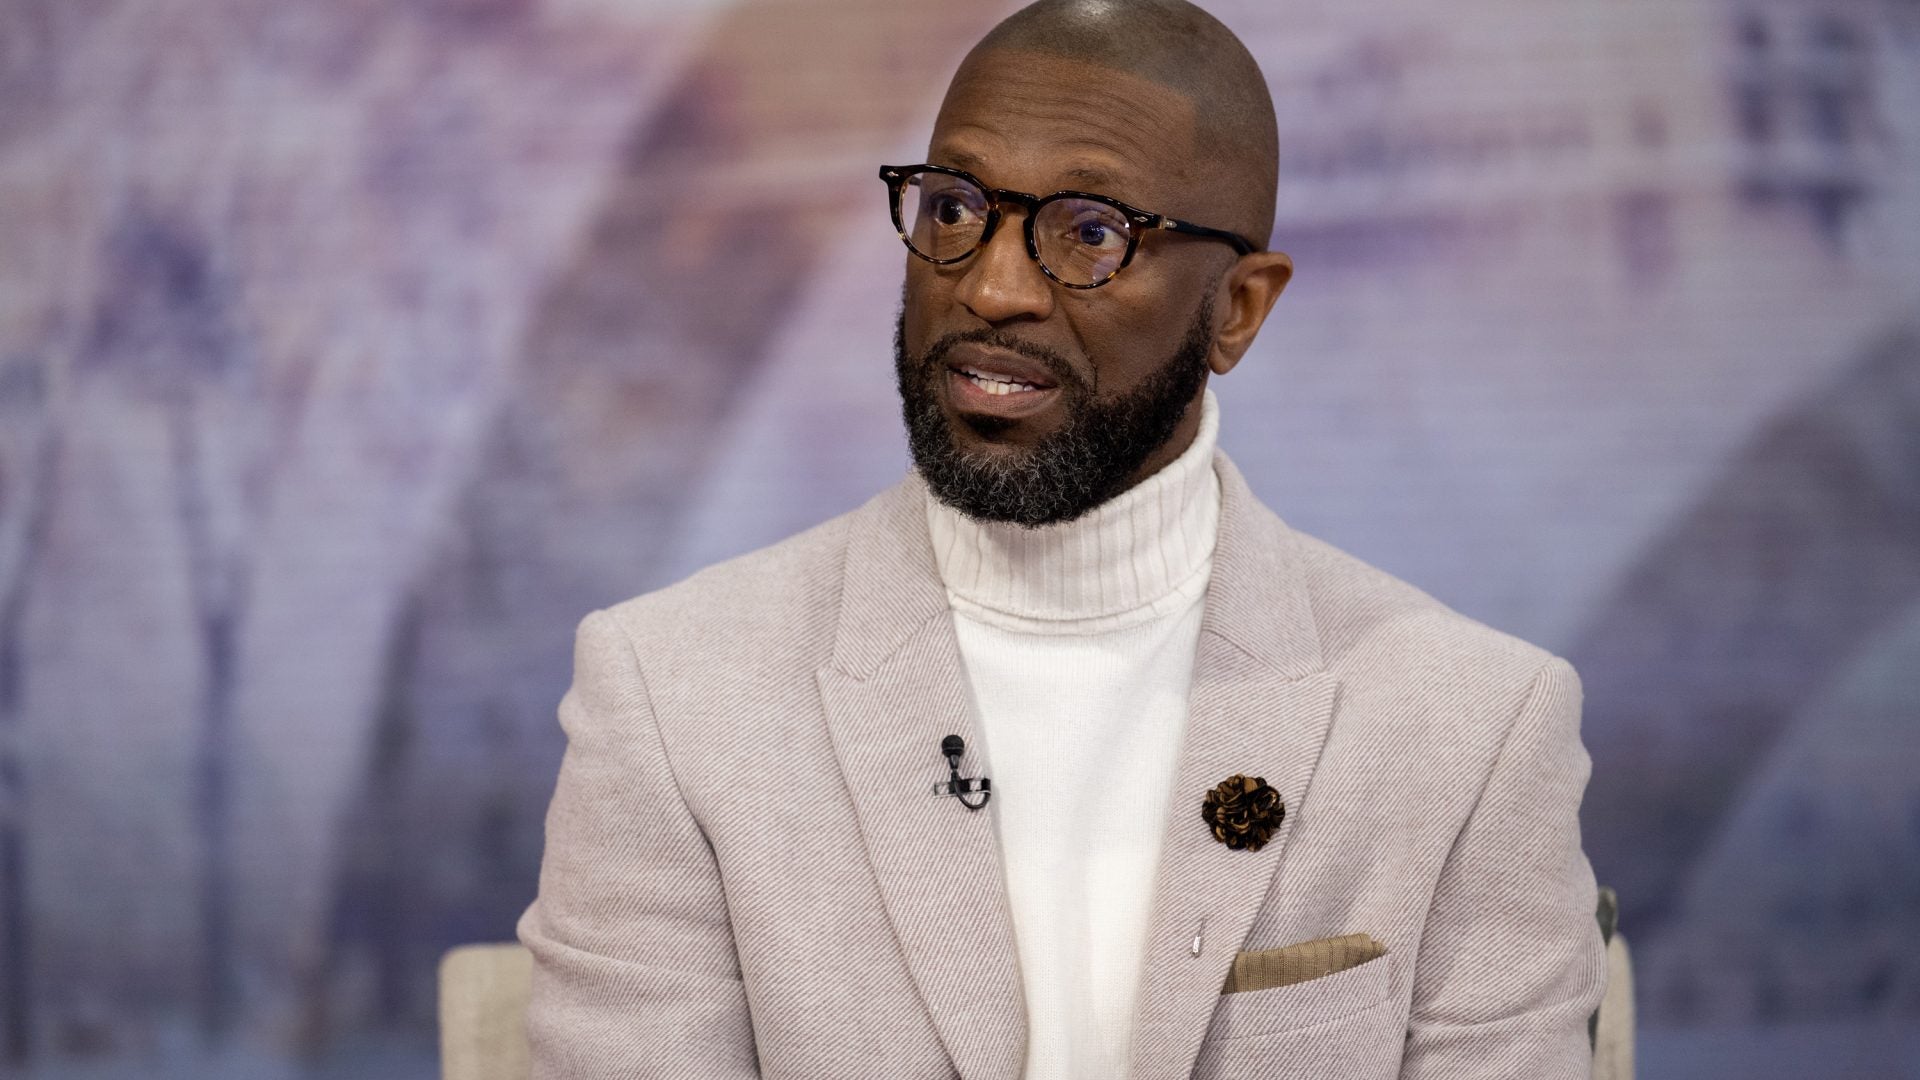 The Daughter Of Rickey Smiley's Late Son Has Helped Him Deal With His Grief